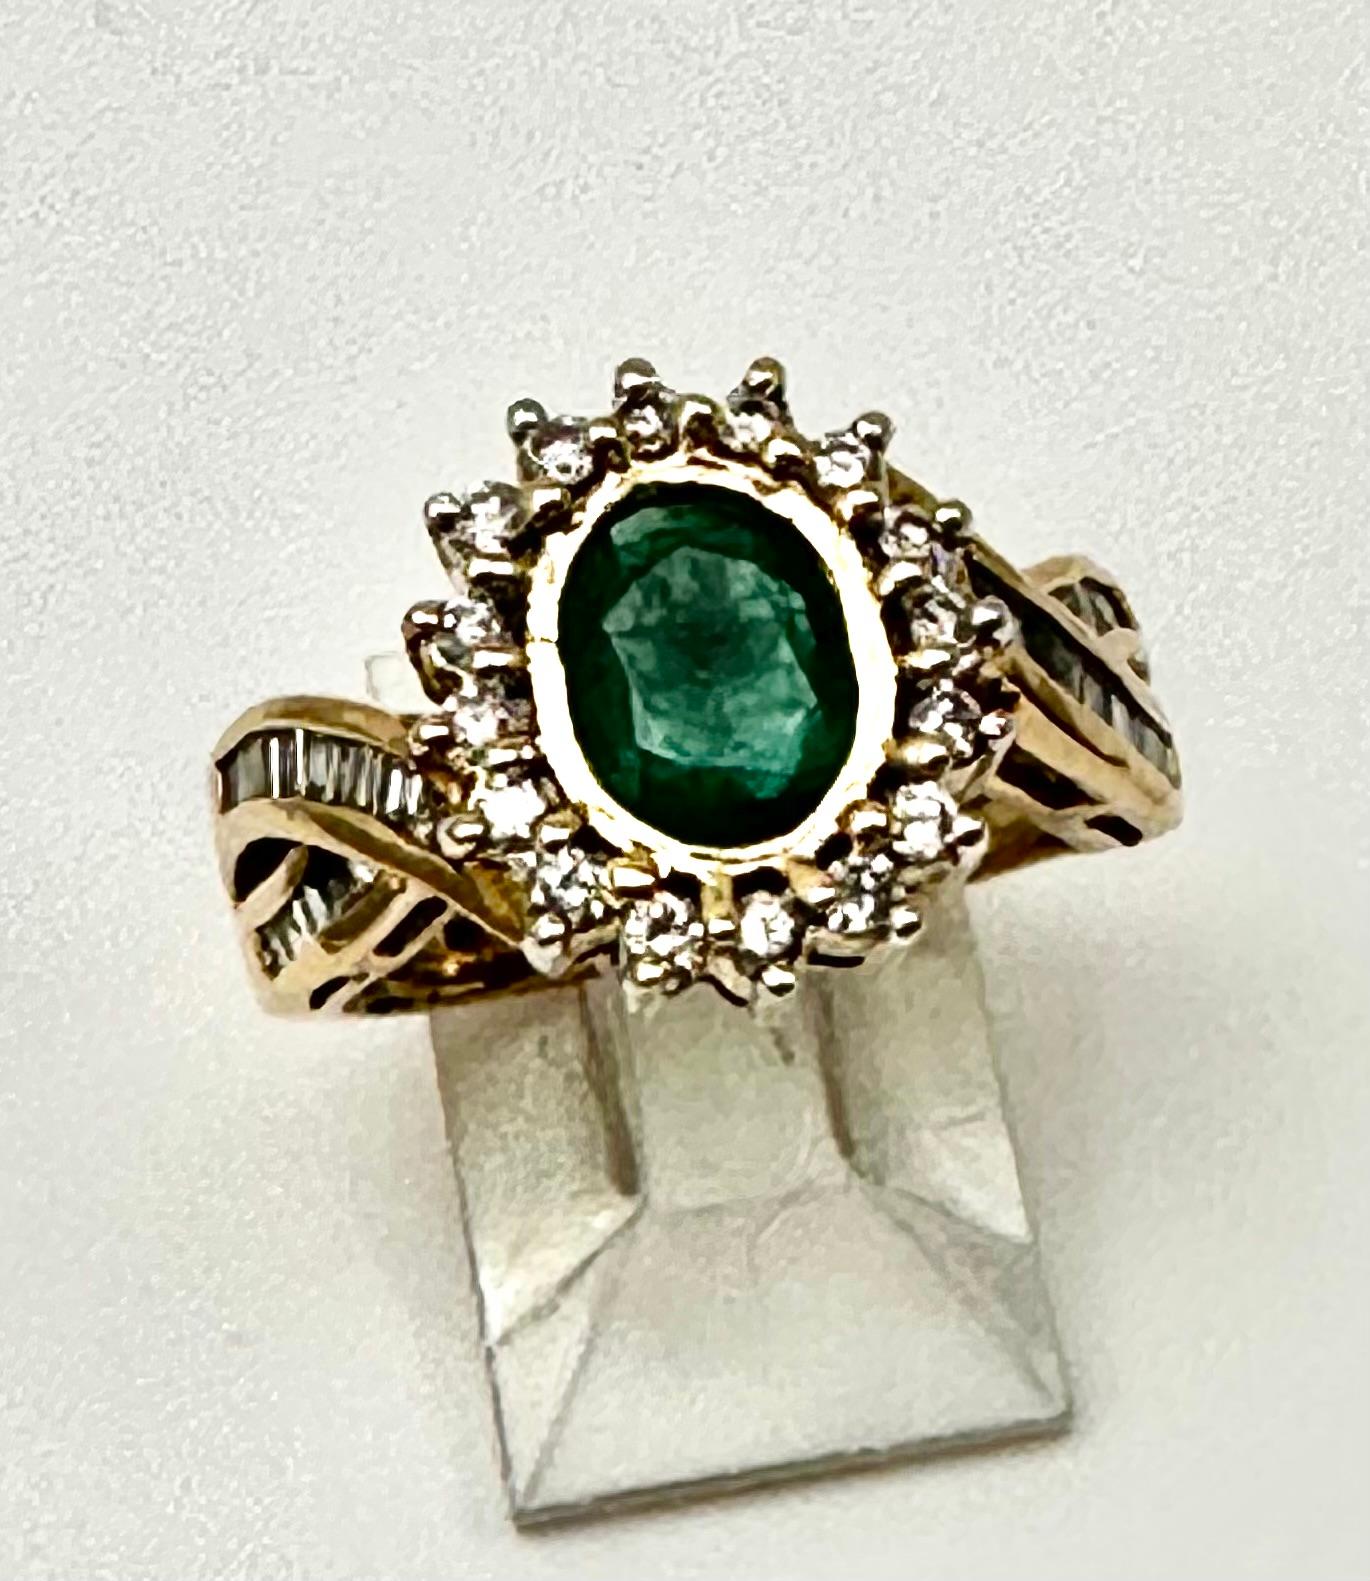 18k Ring Size Yellow Gold Diamond 5.5mm x 7.5mm Oval Emerald Ring Size 6 1/4
Top of ring measures approx 13mm x 14.3mm 

Emerald is a life-affirming stone. It opens the heart chakra and calms the emotions. It provides inspiration, balance, wisdom,